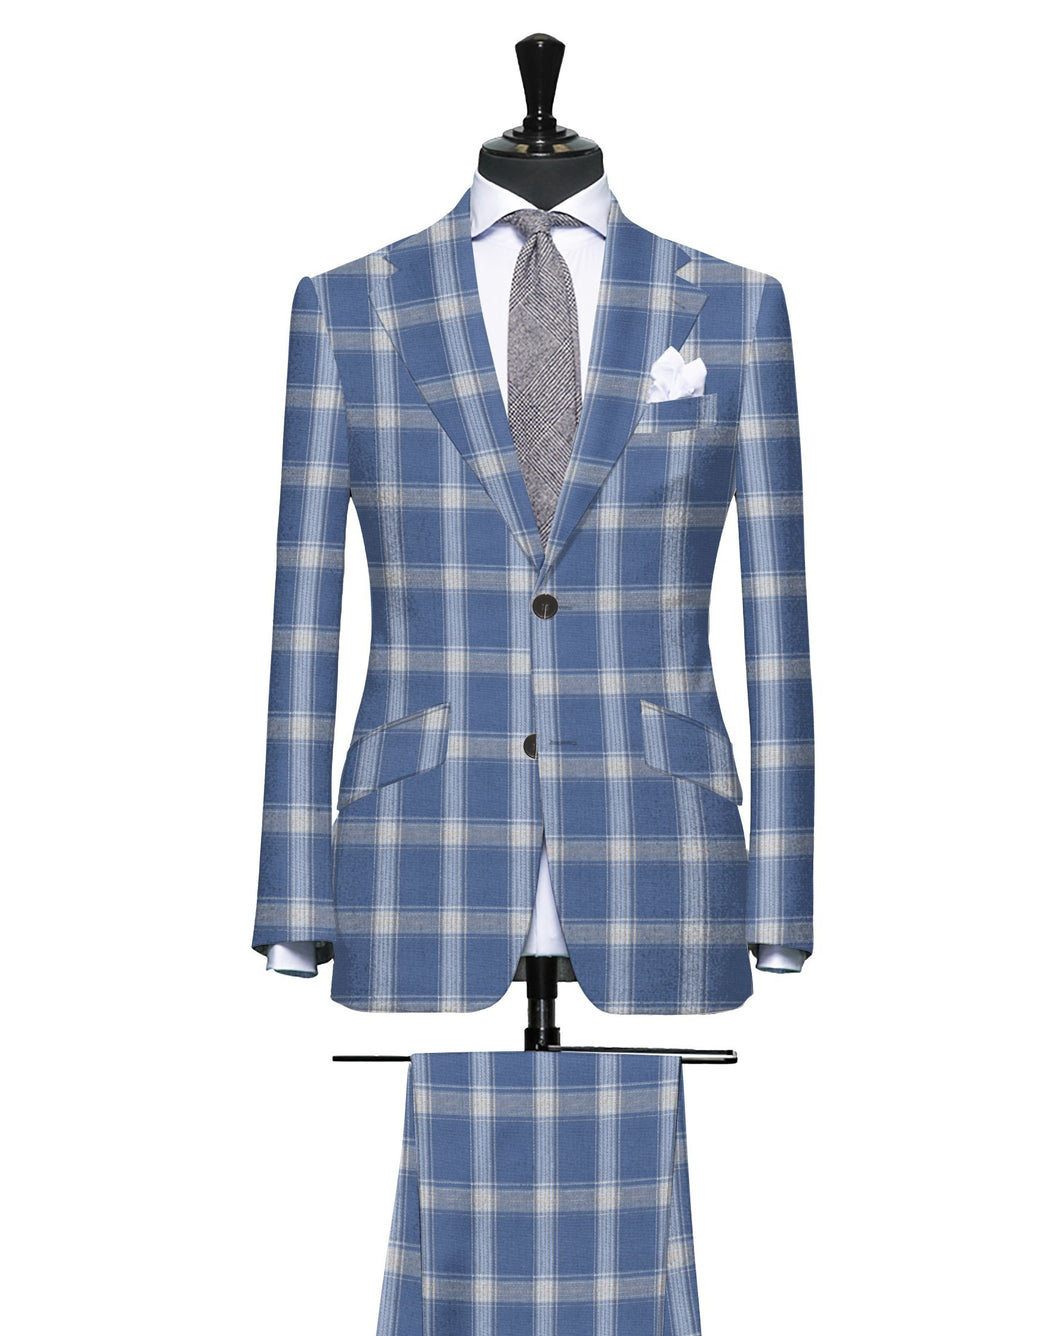 Grayish Blue with Tan and Cream Large Plaid Pattern, Super 140, Wool